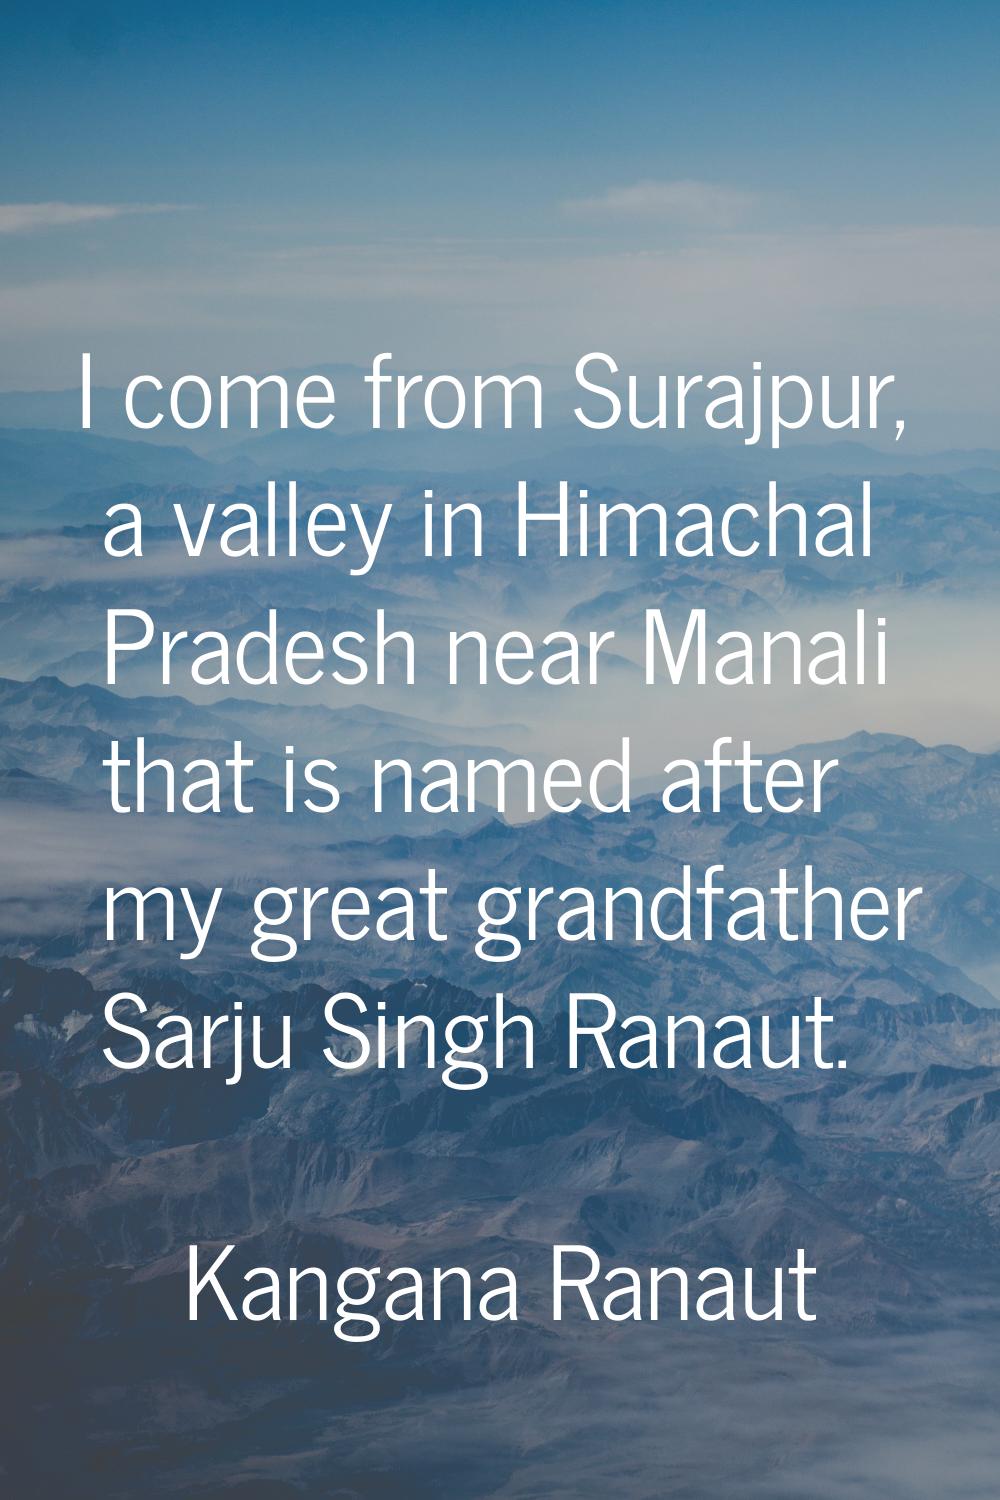 I come from Surajpur, a valley in Himachal Pradesh near Manali that is named after my great grandfa